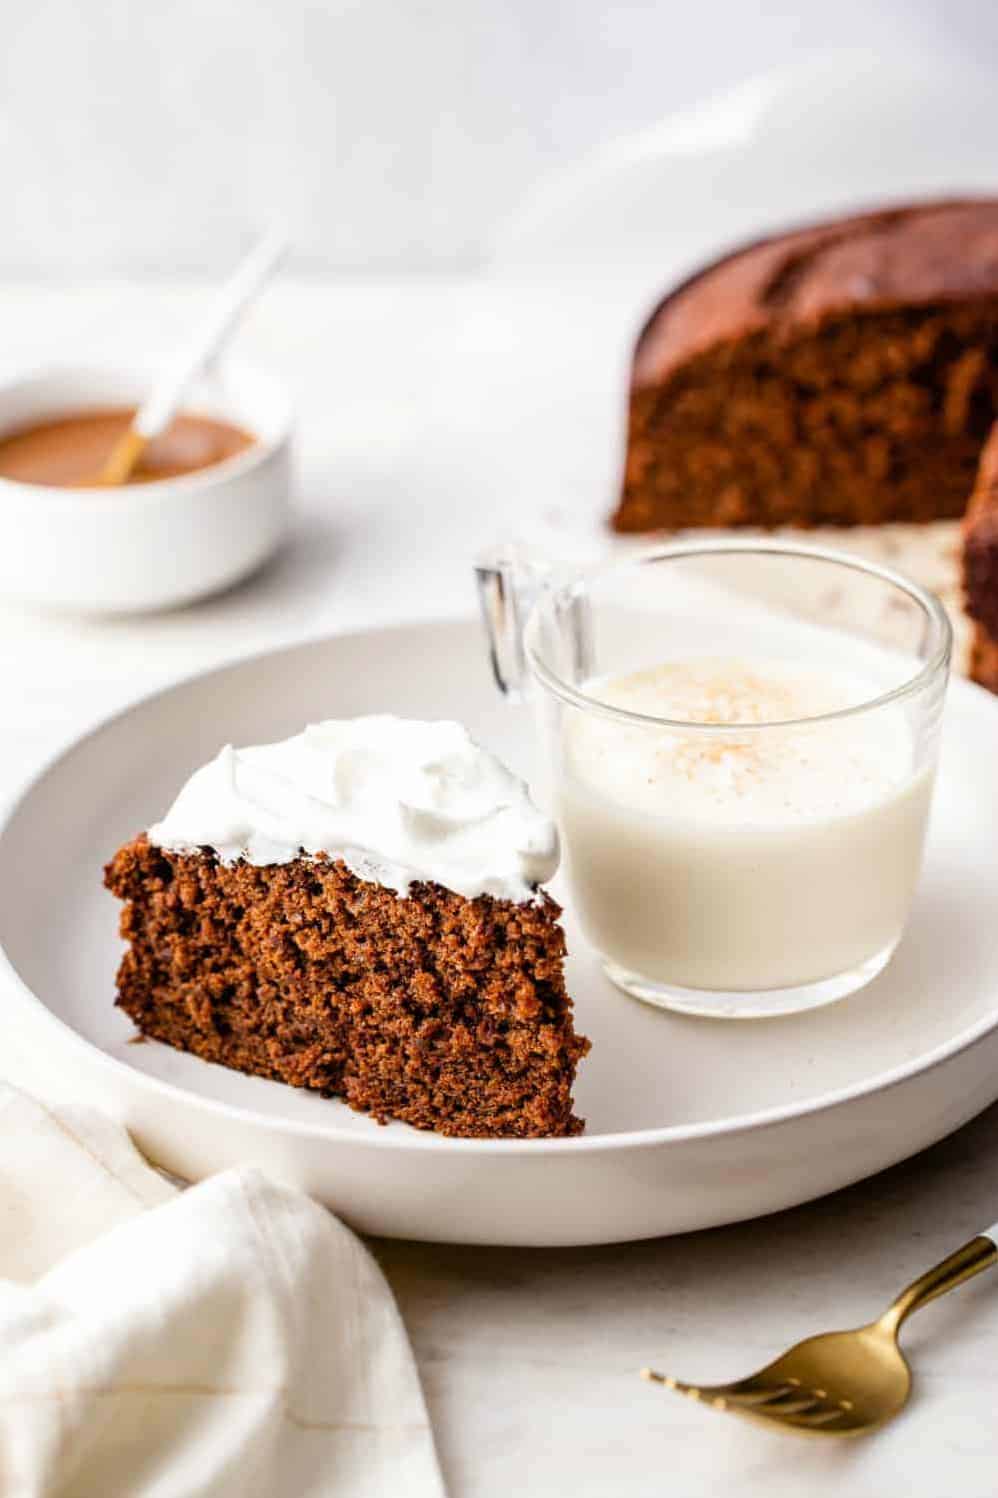  Celebrate the holidays with a slice (or two) of this festive White Gingerbread Tea Cake